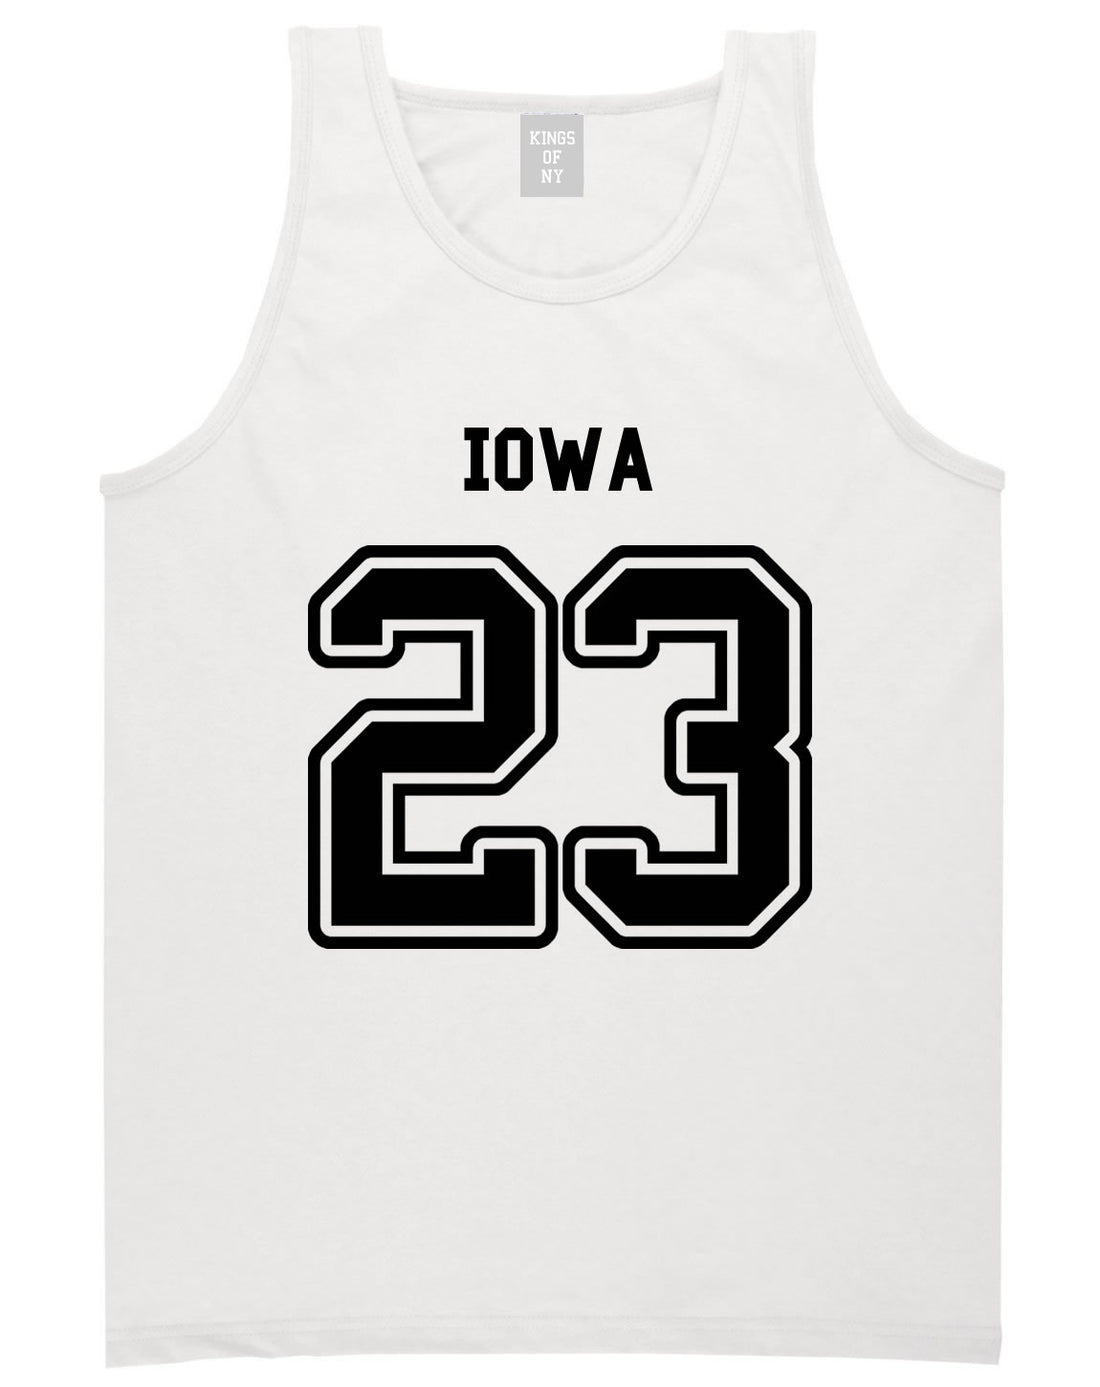 Sport Style Iowa 23 Team State Jersey Mens Tank Top By Kings Of NY